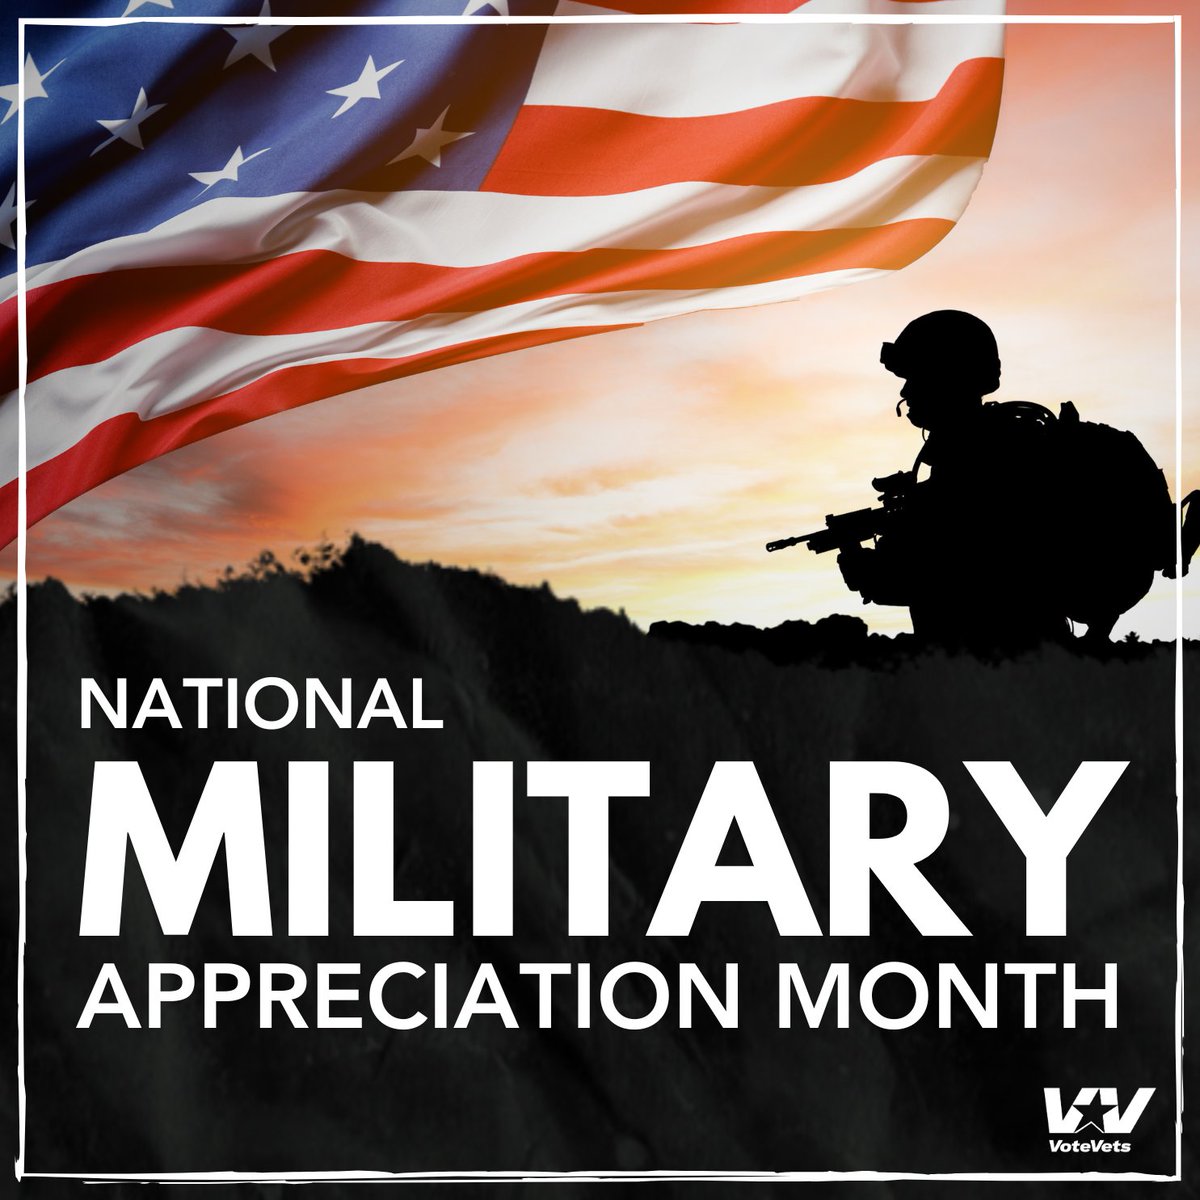 🇺🇸During #MilitaryAppreciationMonth, we honor those who served or are serving in the U.S. Armed Forces. As Veterans, we understand the sacrifices made to safeguard our nation and preserve our liberties, and we are forever grateful to those who answer the call of duty.